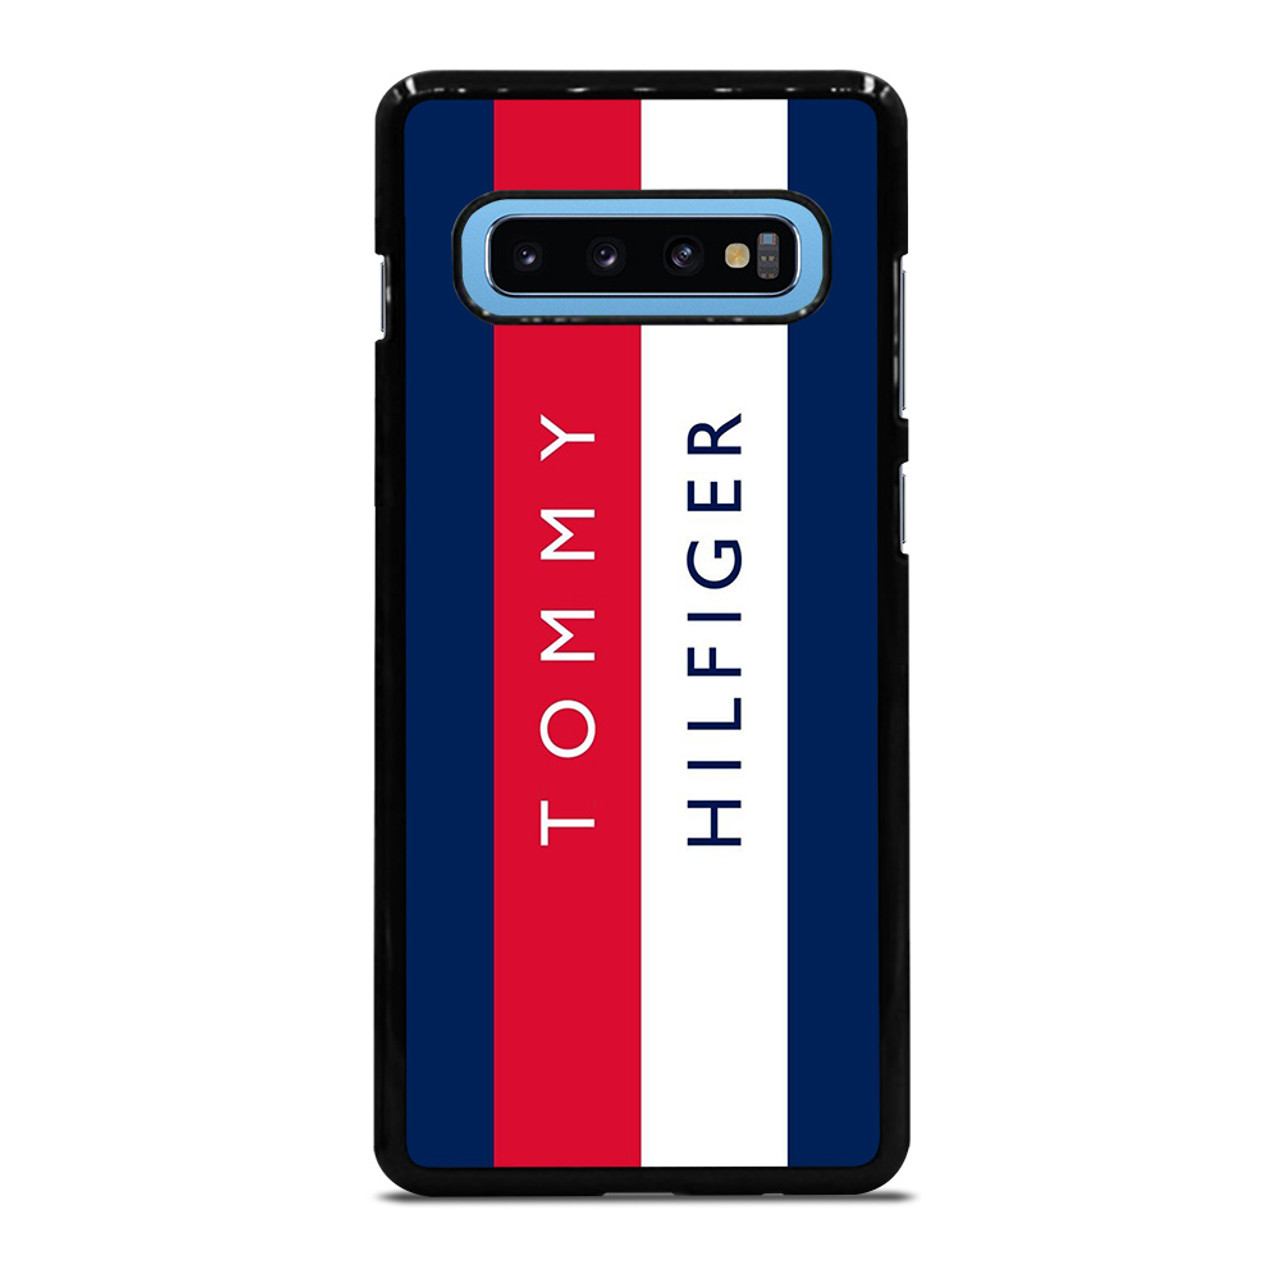 TOMMY HILFIGER VERTICAL LOGO Samsung Galaxy S10 Plus Case Cover